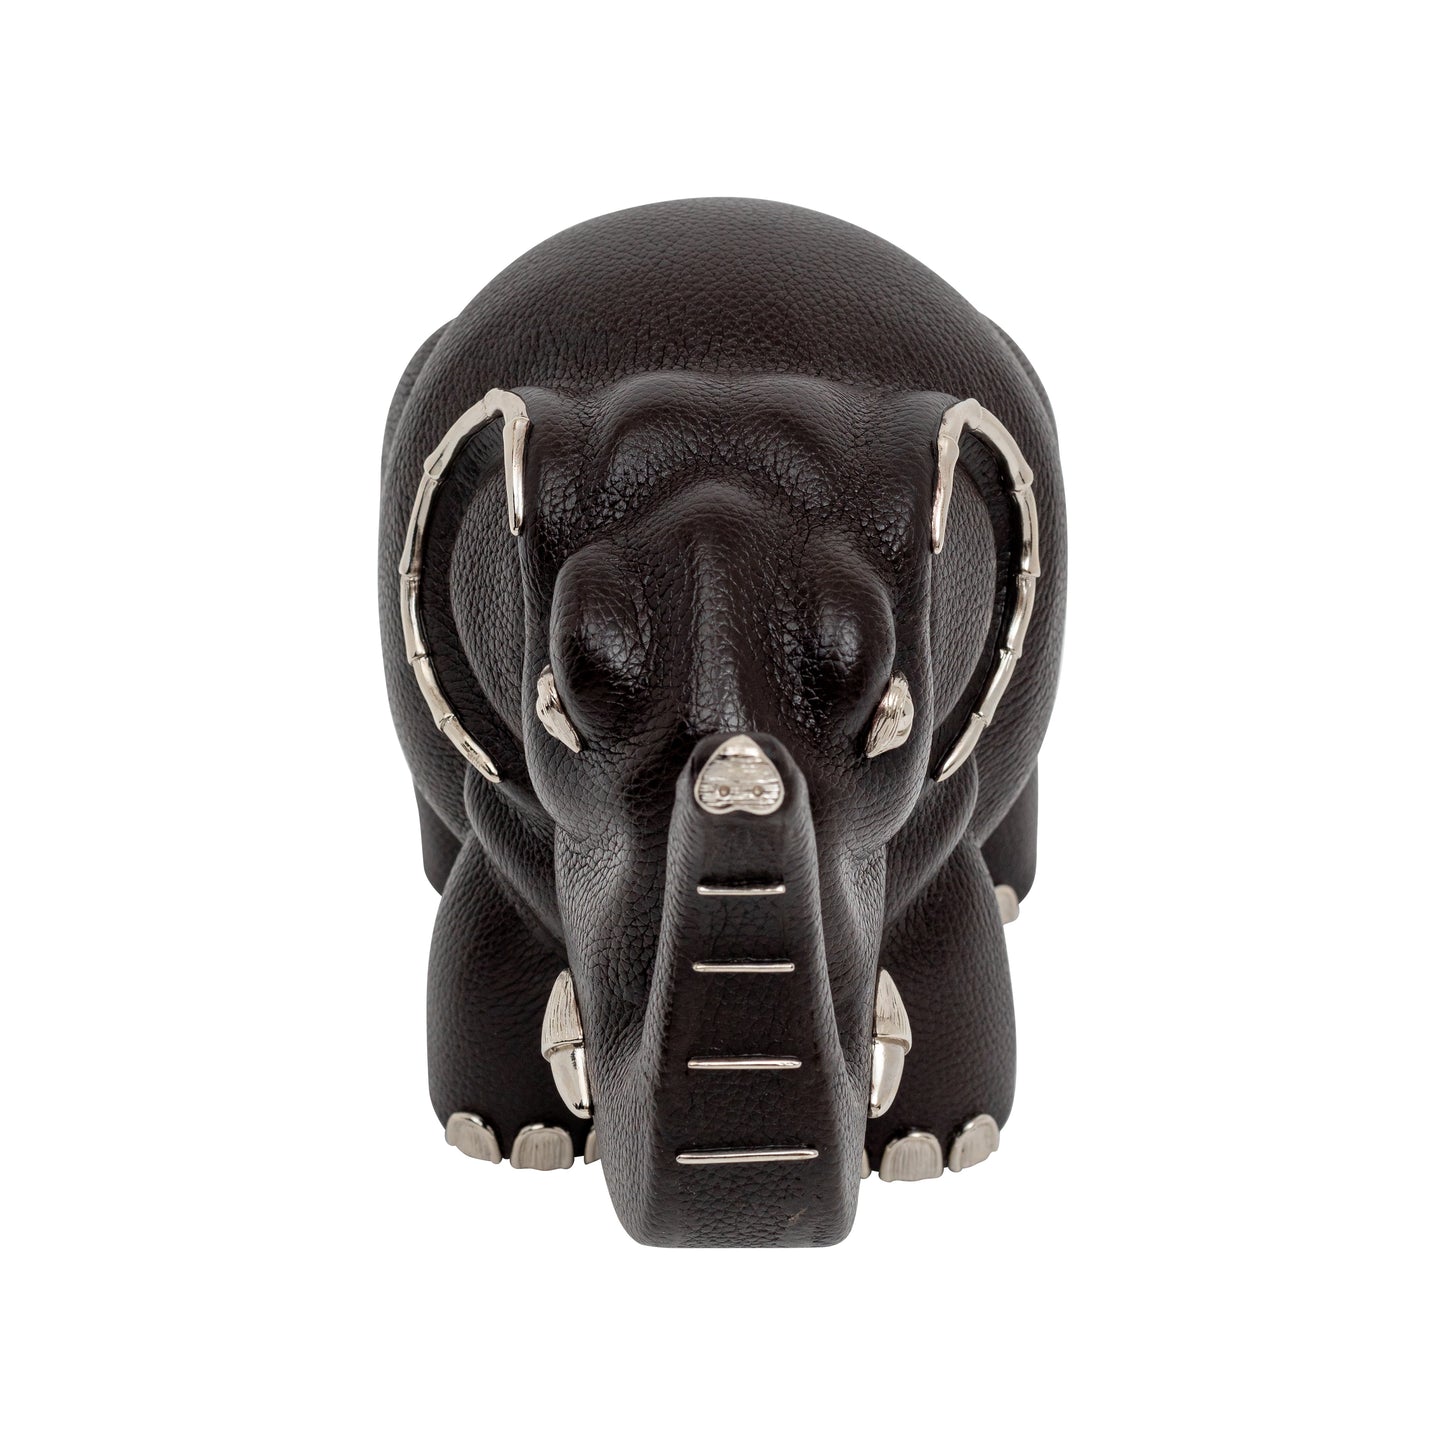 Elephant Paperweight/Bookend